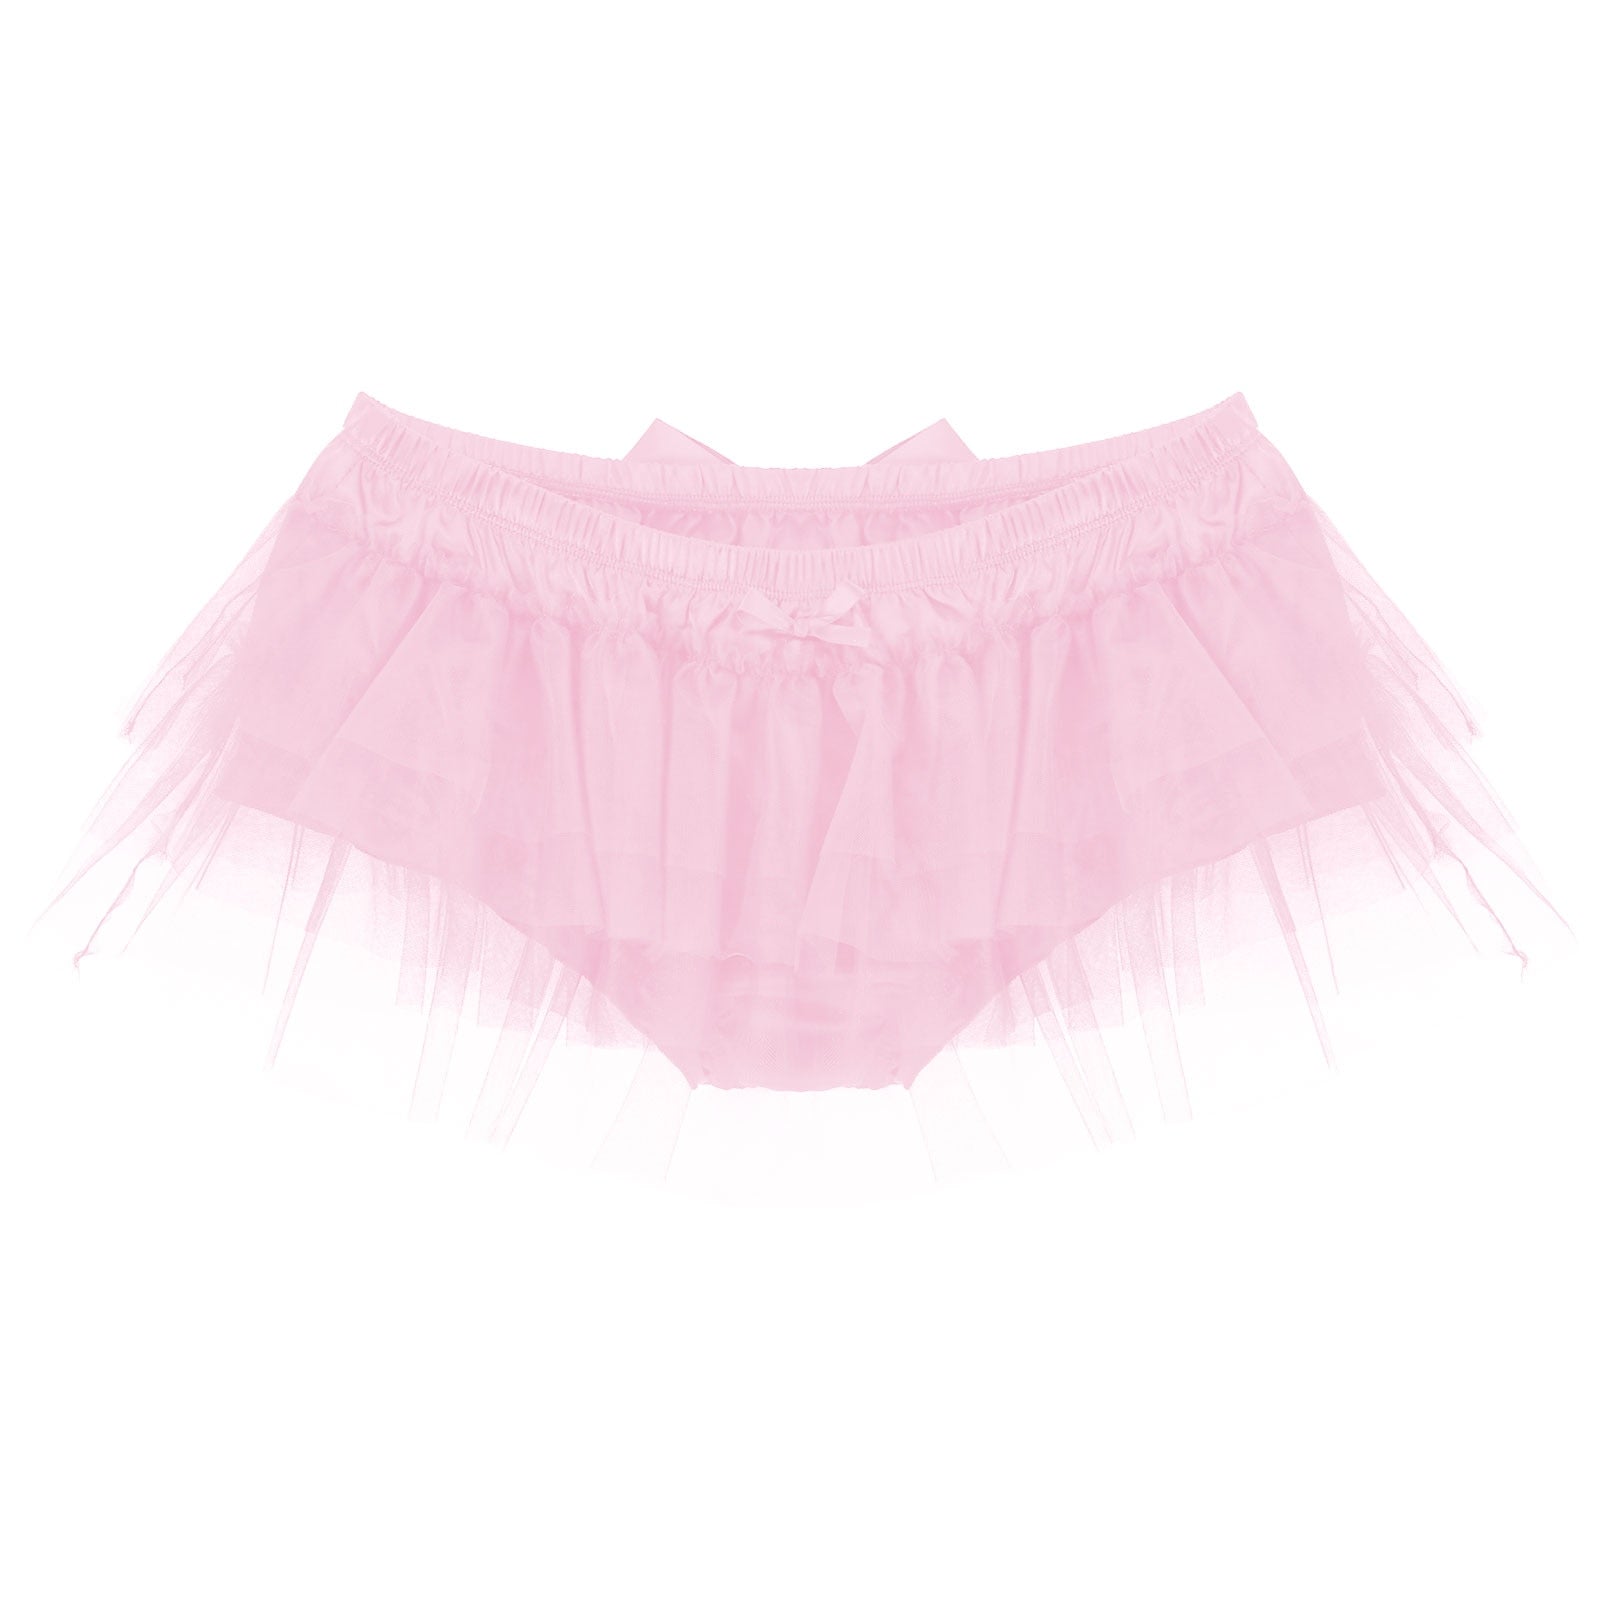 Mens Sissy Lingerie Exotic Panties Satin Frilly Layered Ruffle Tulle Mini Skirt Pink